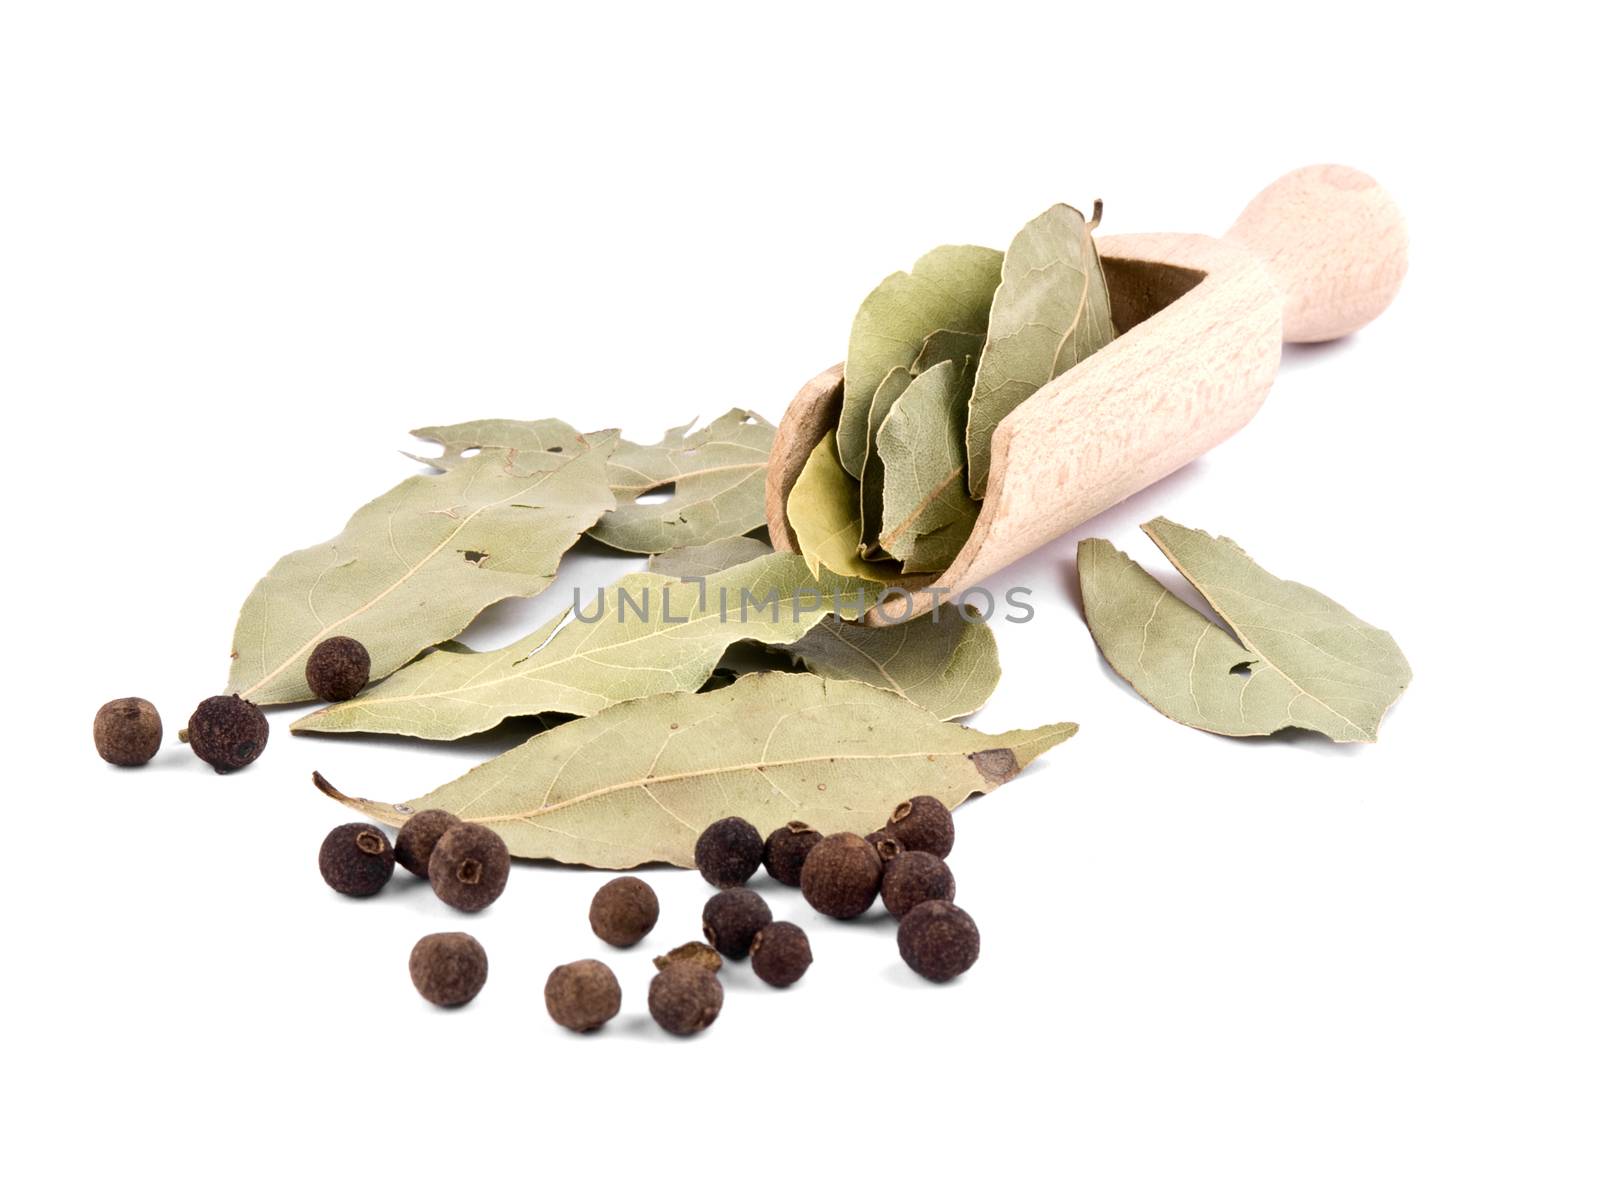 Whole allspice berries, bay leafs and wooden shovel on white background